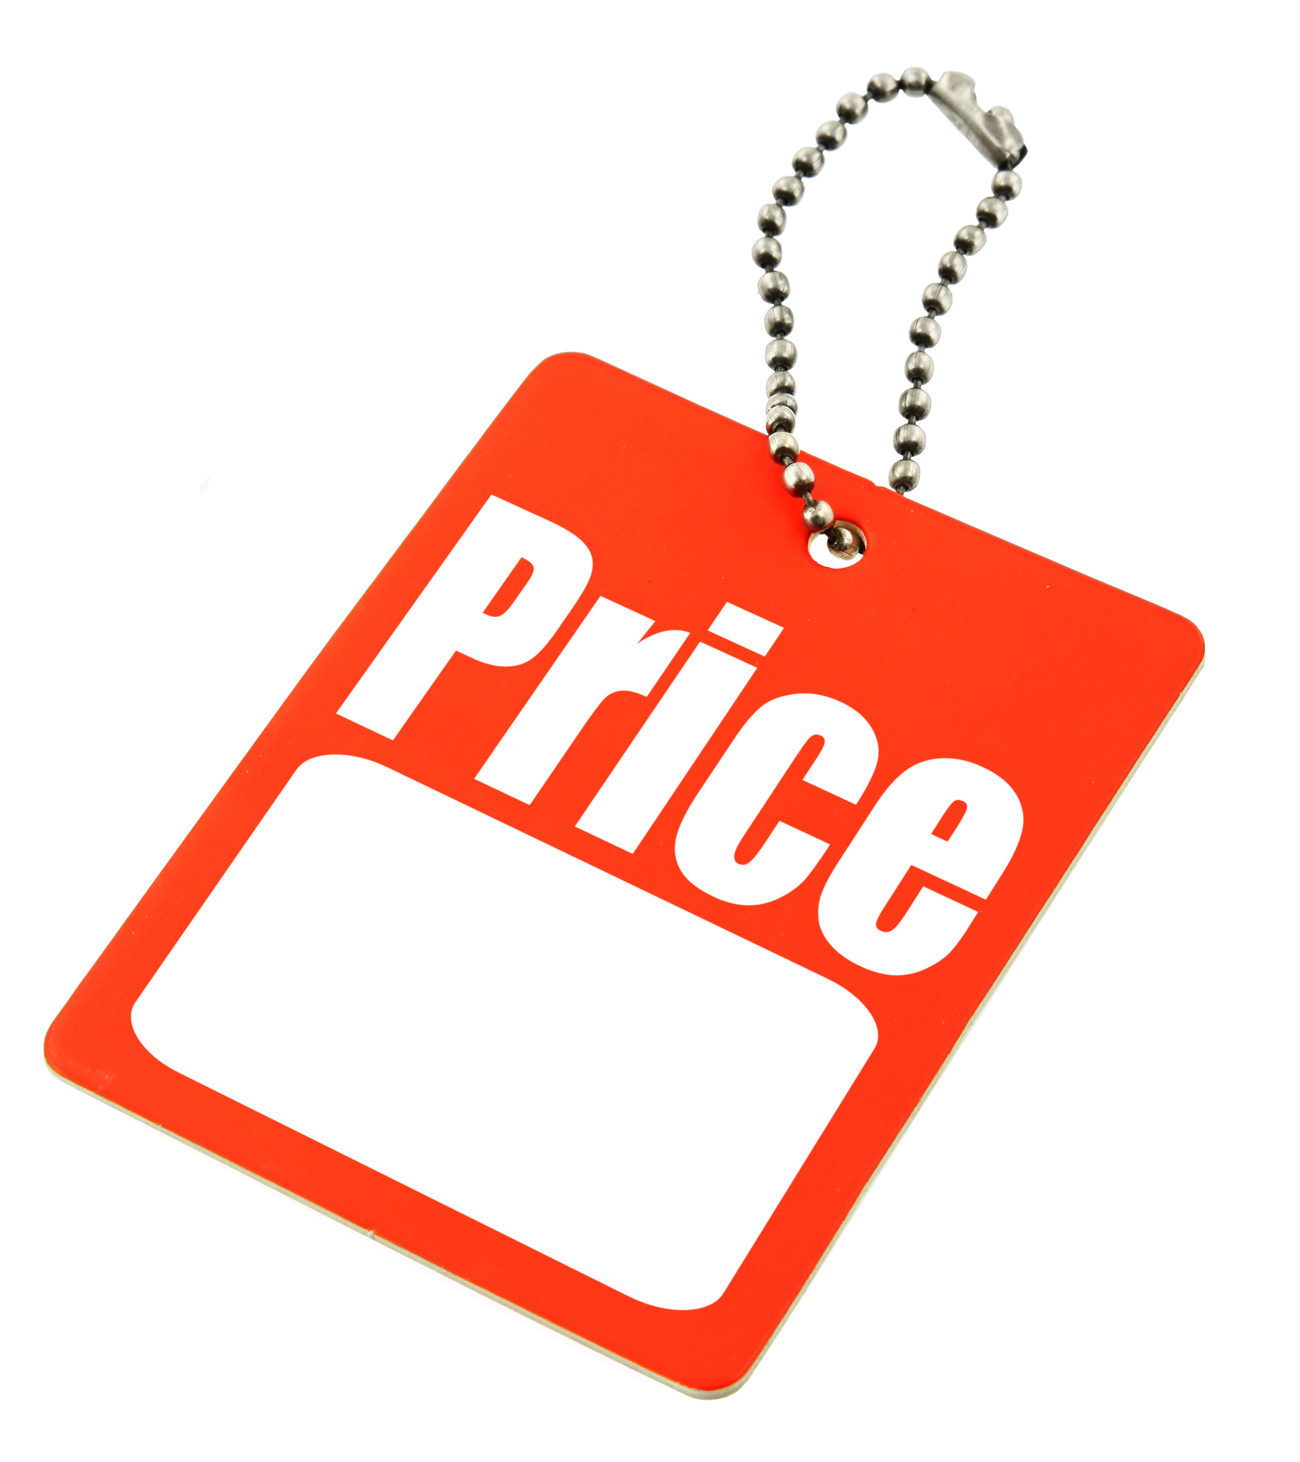 Price tag clipart co